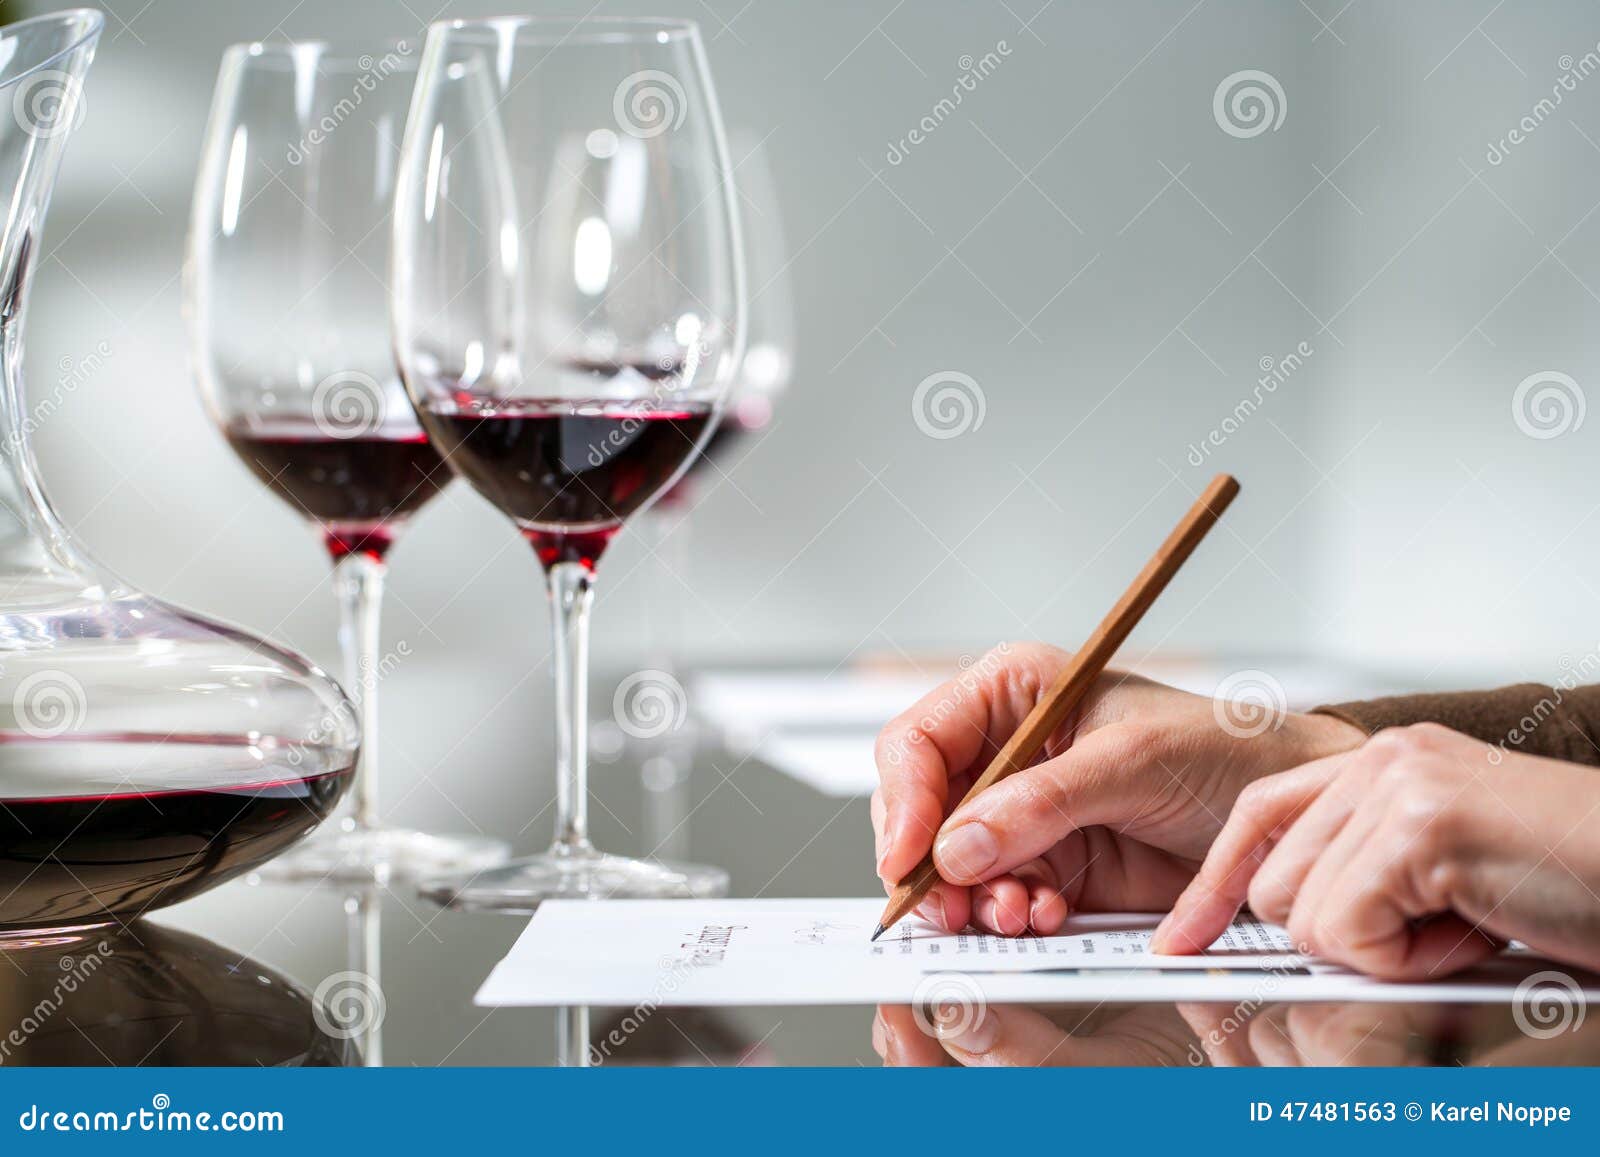 female hand taking notes at red wine tasting.